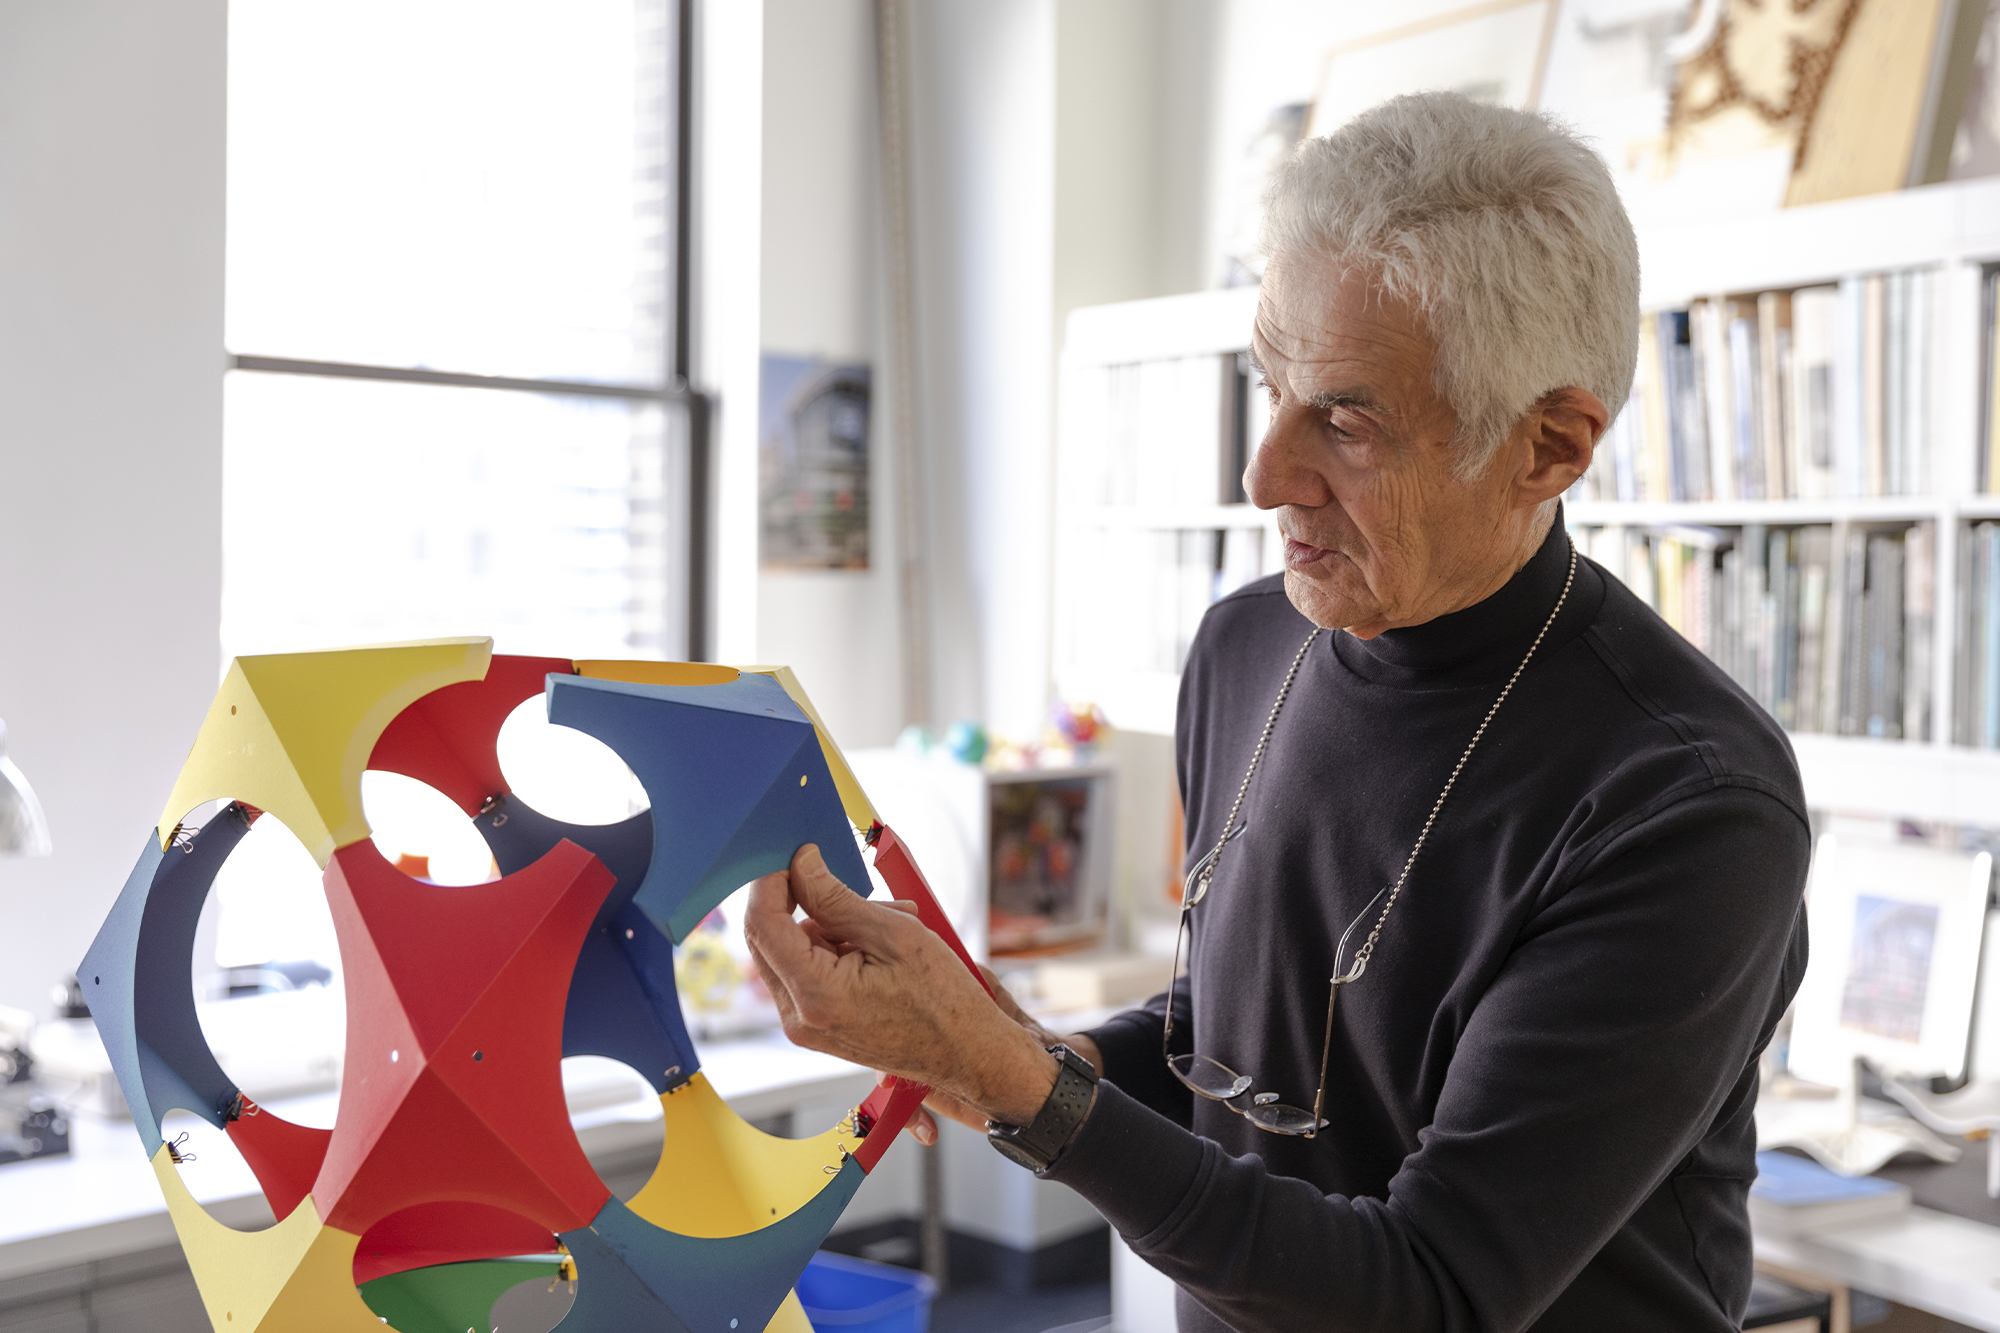 Richard Dattner with PlayCubes